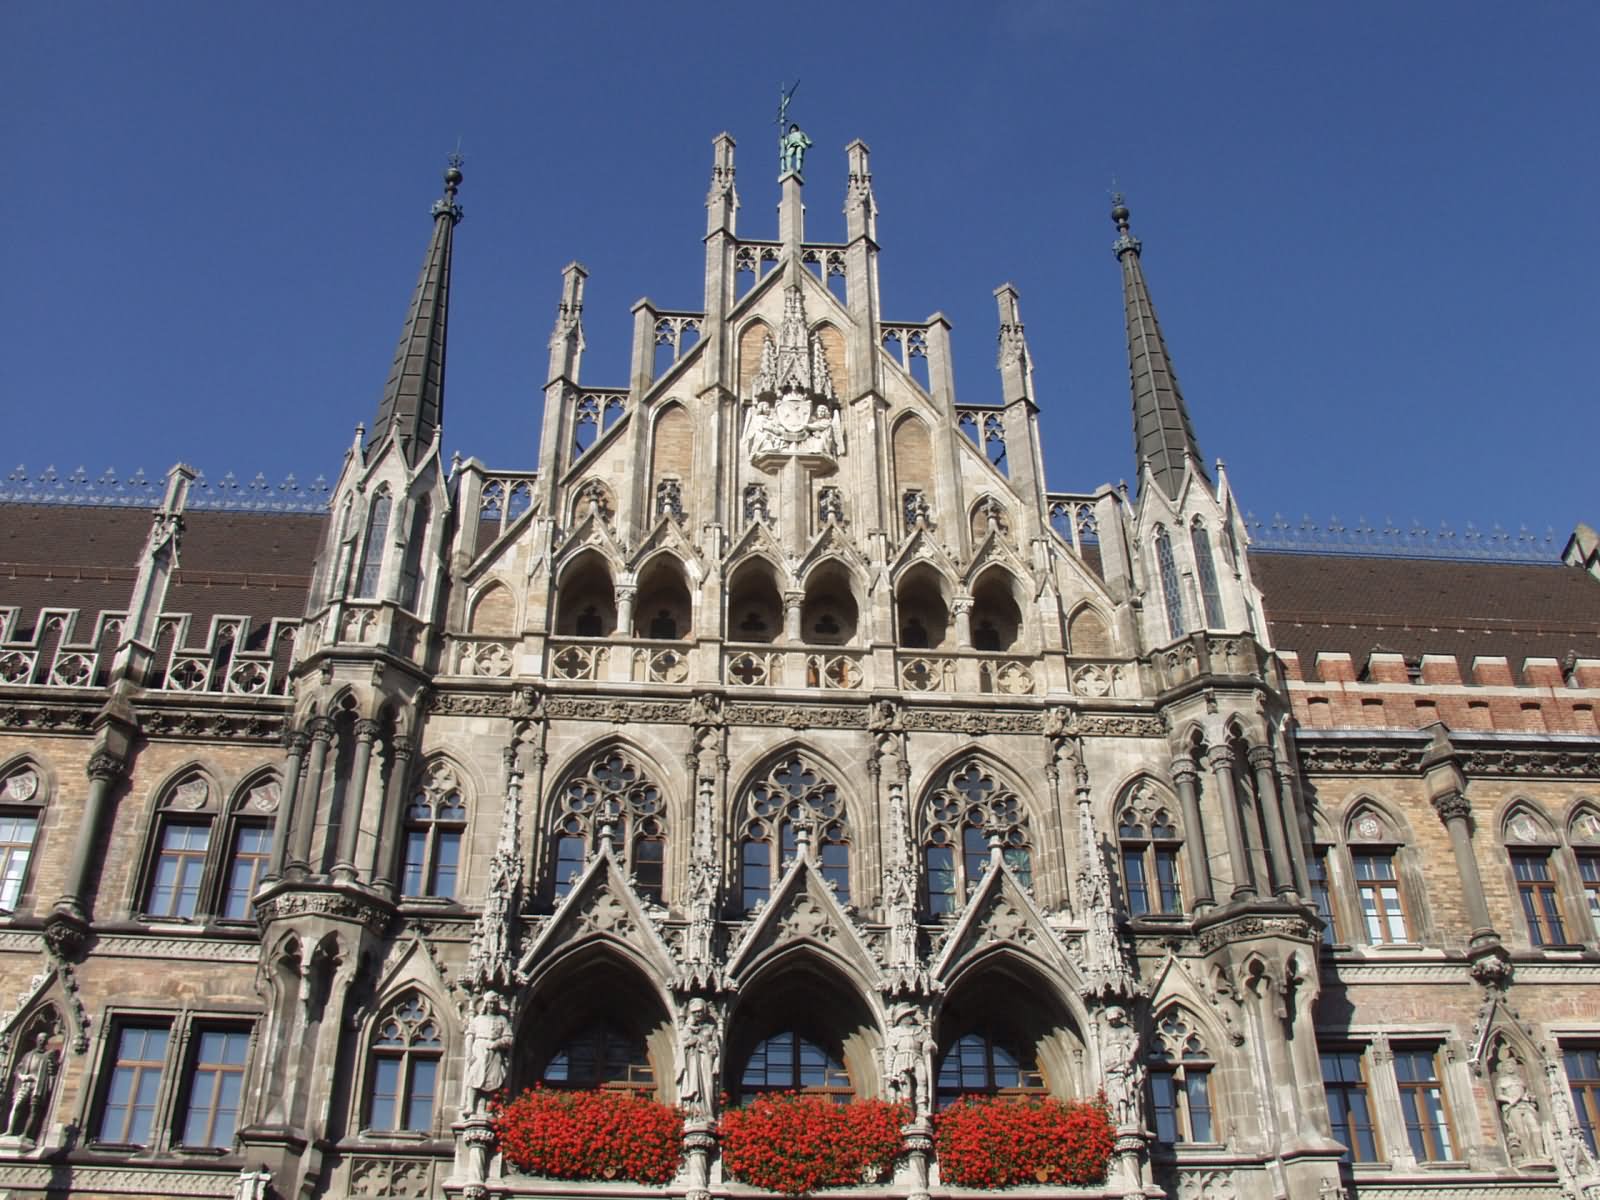 Details Of The Neues Rathaus In Munich, Germany